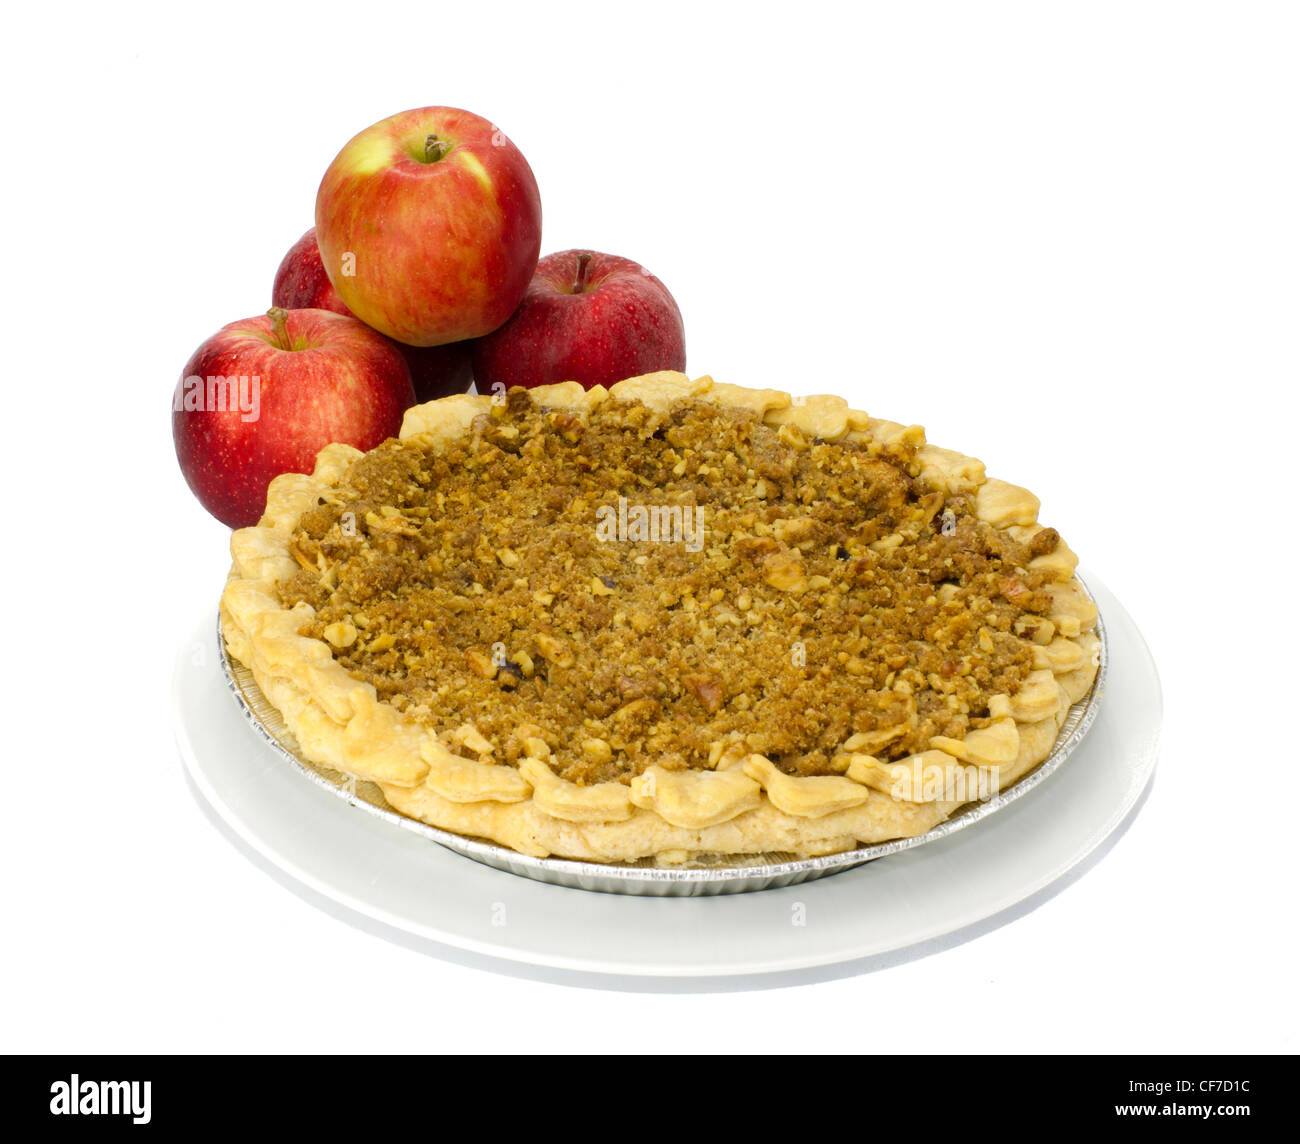 Freshly baked apple pie on white plate with red apples Stock Photo